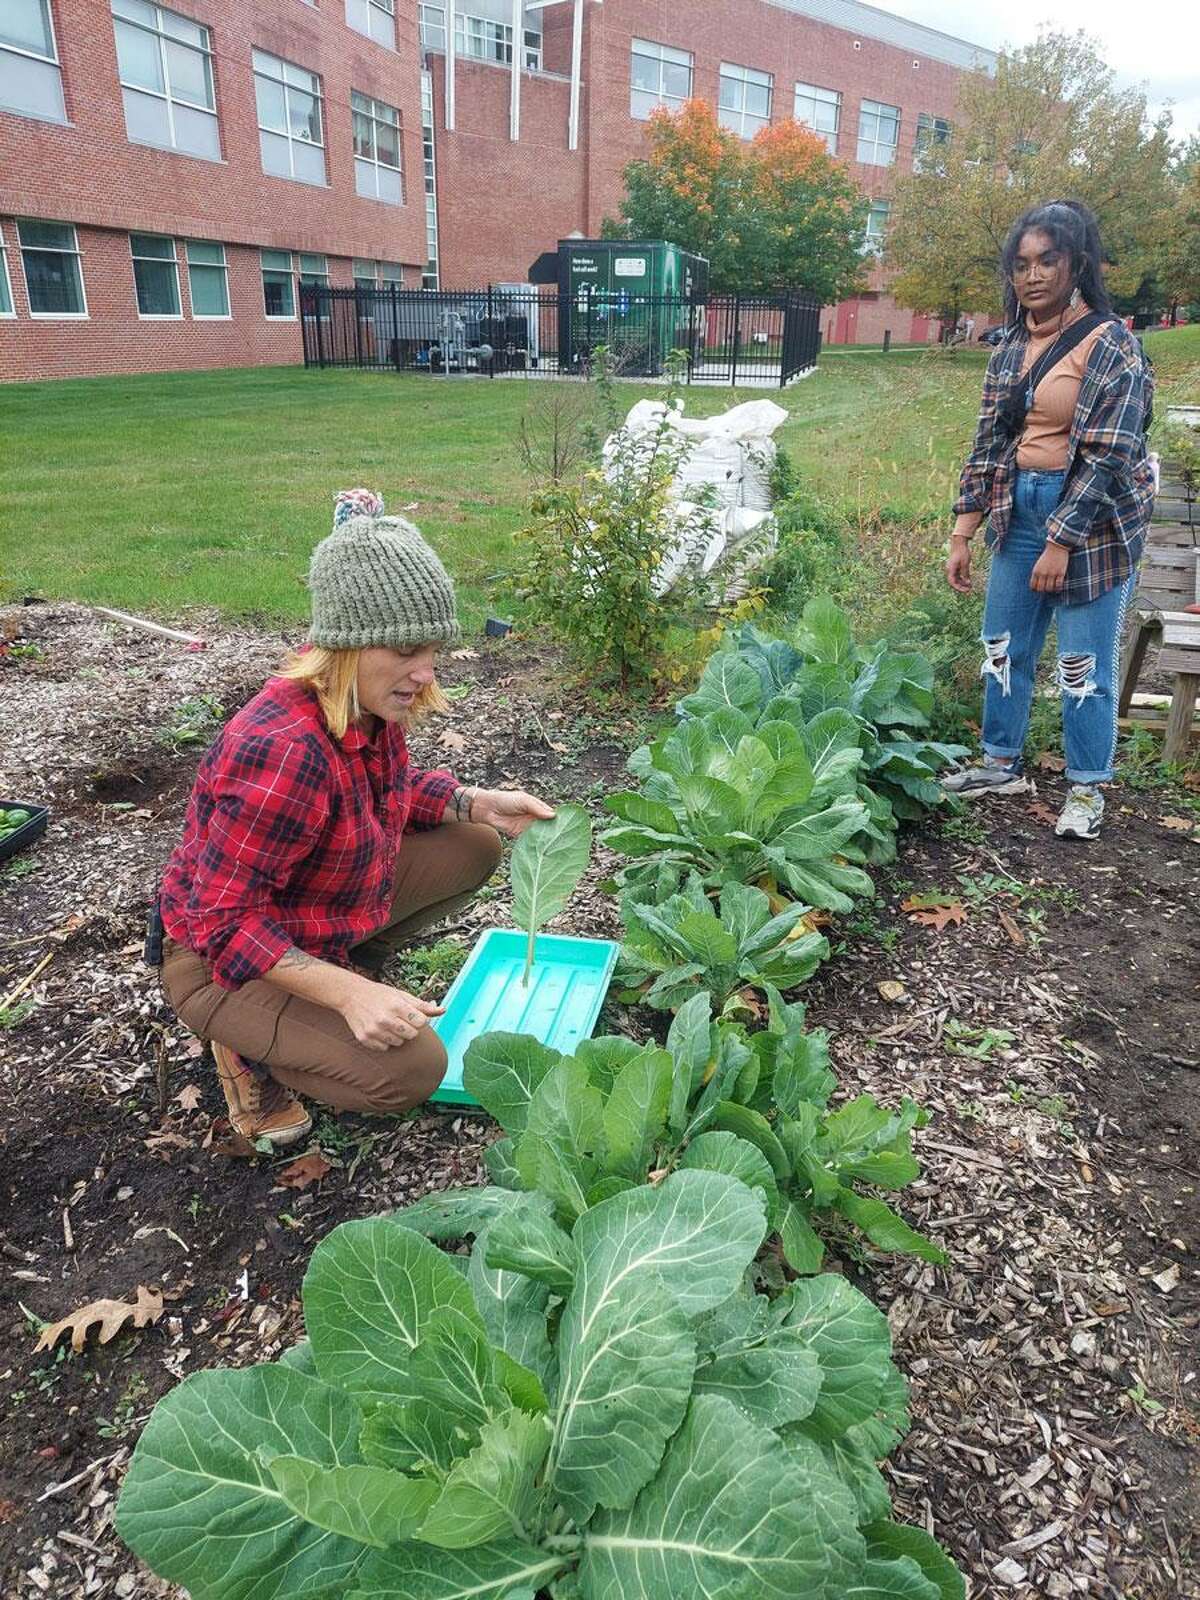 The Western Connecticut State University Permaculture Garden is hosting four free gardening workshops in the coming weeks.